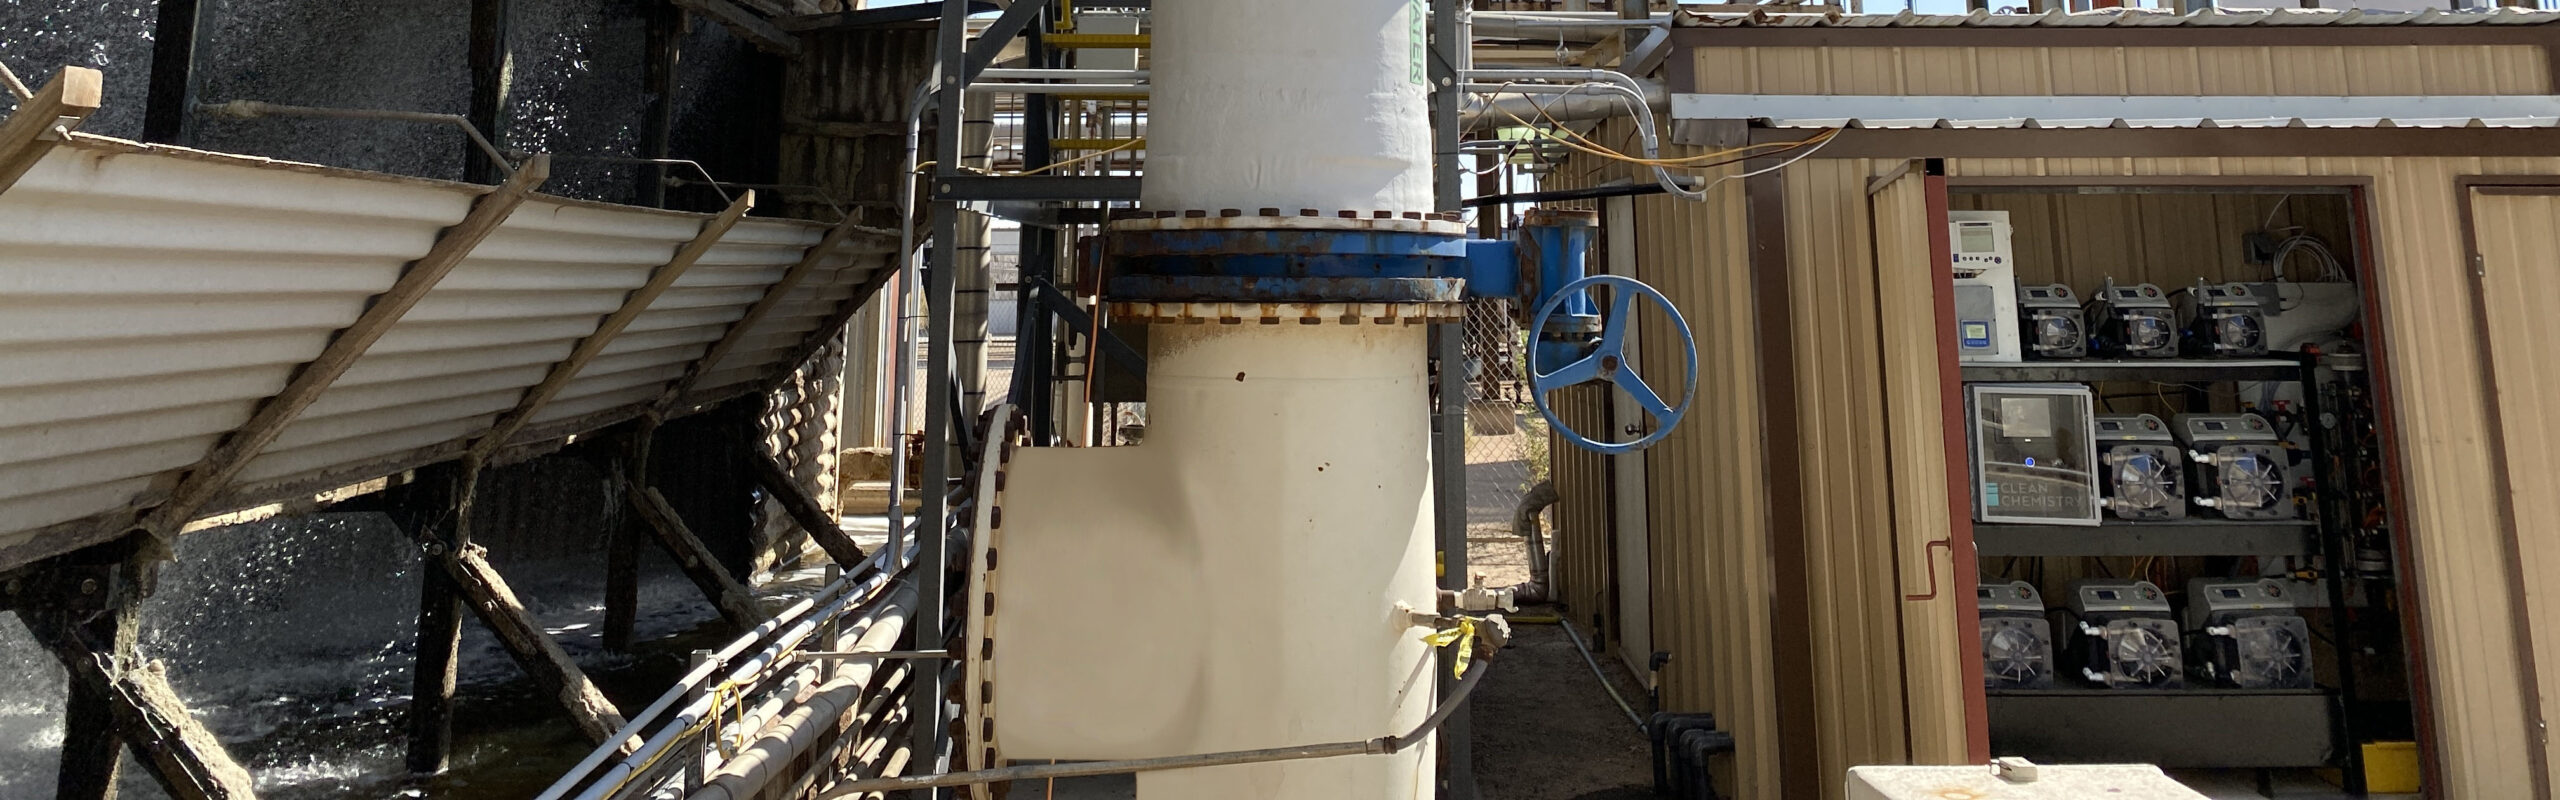 A Clean Chemistry unit treats water for a cooling tower at a refinery